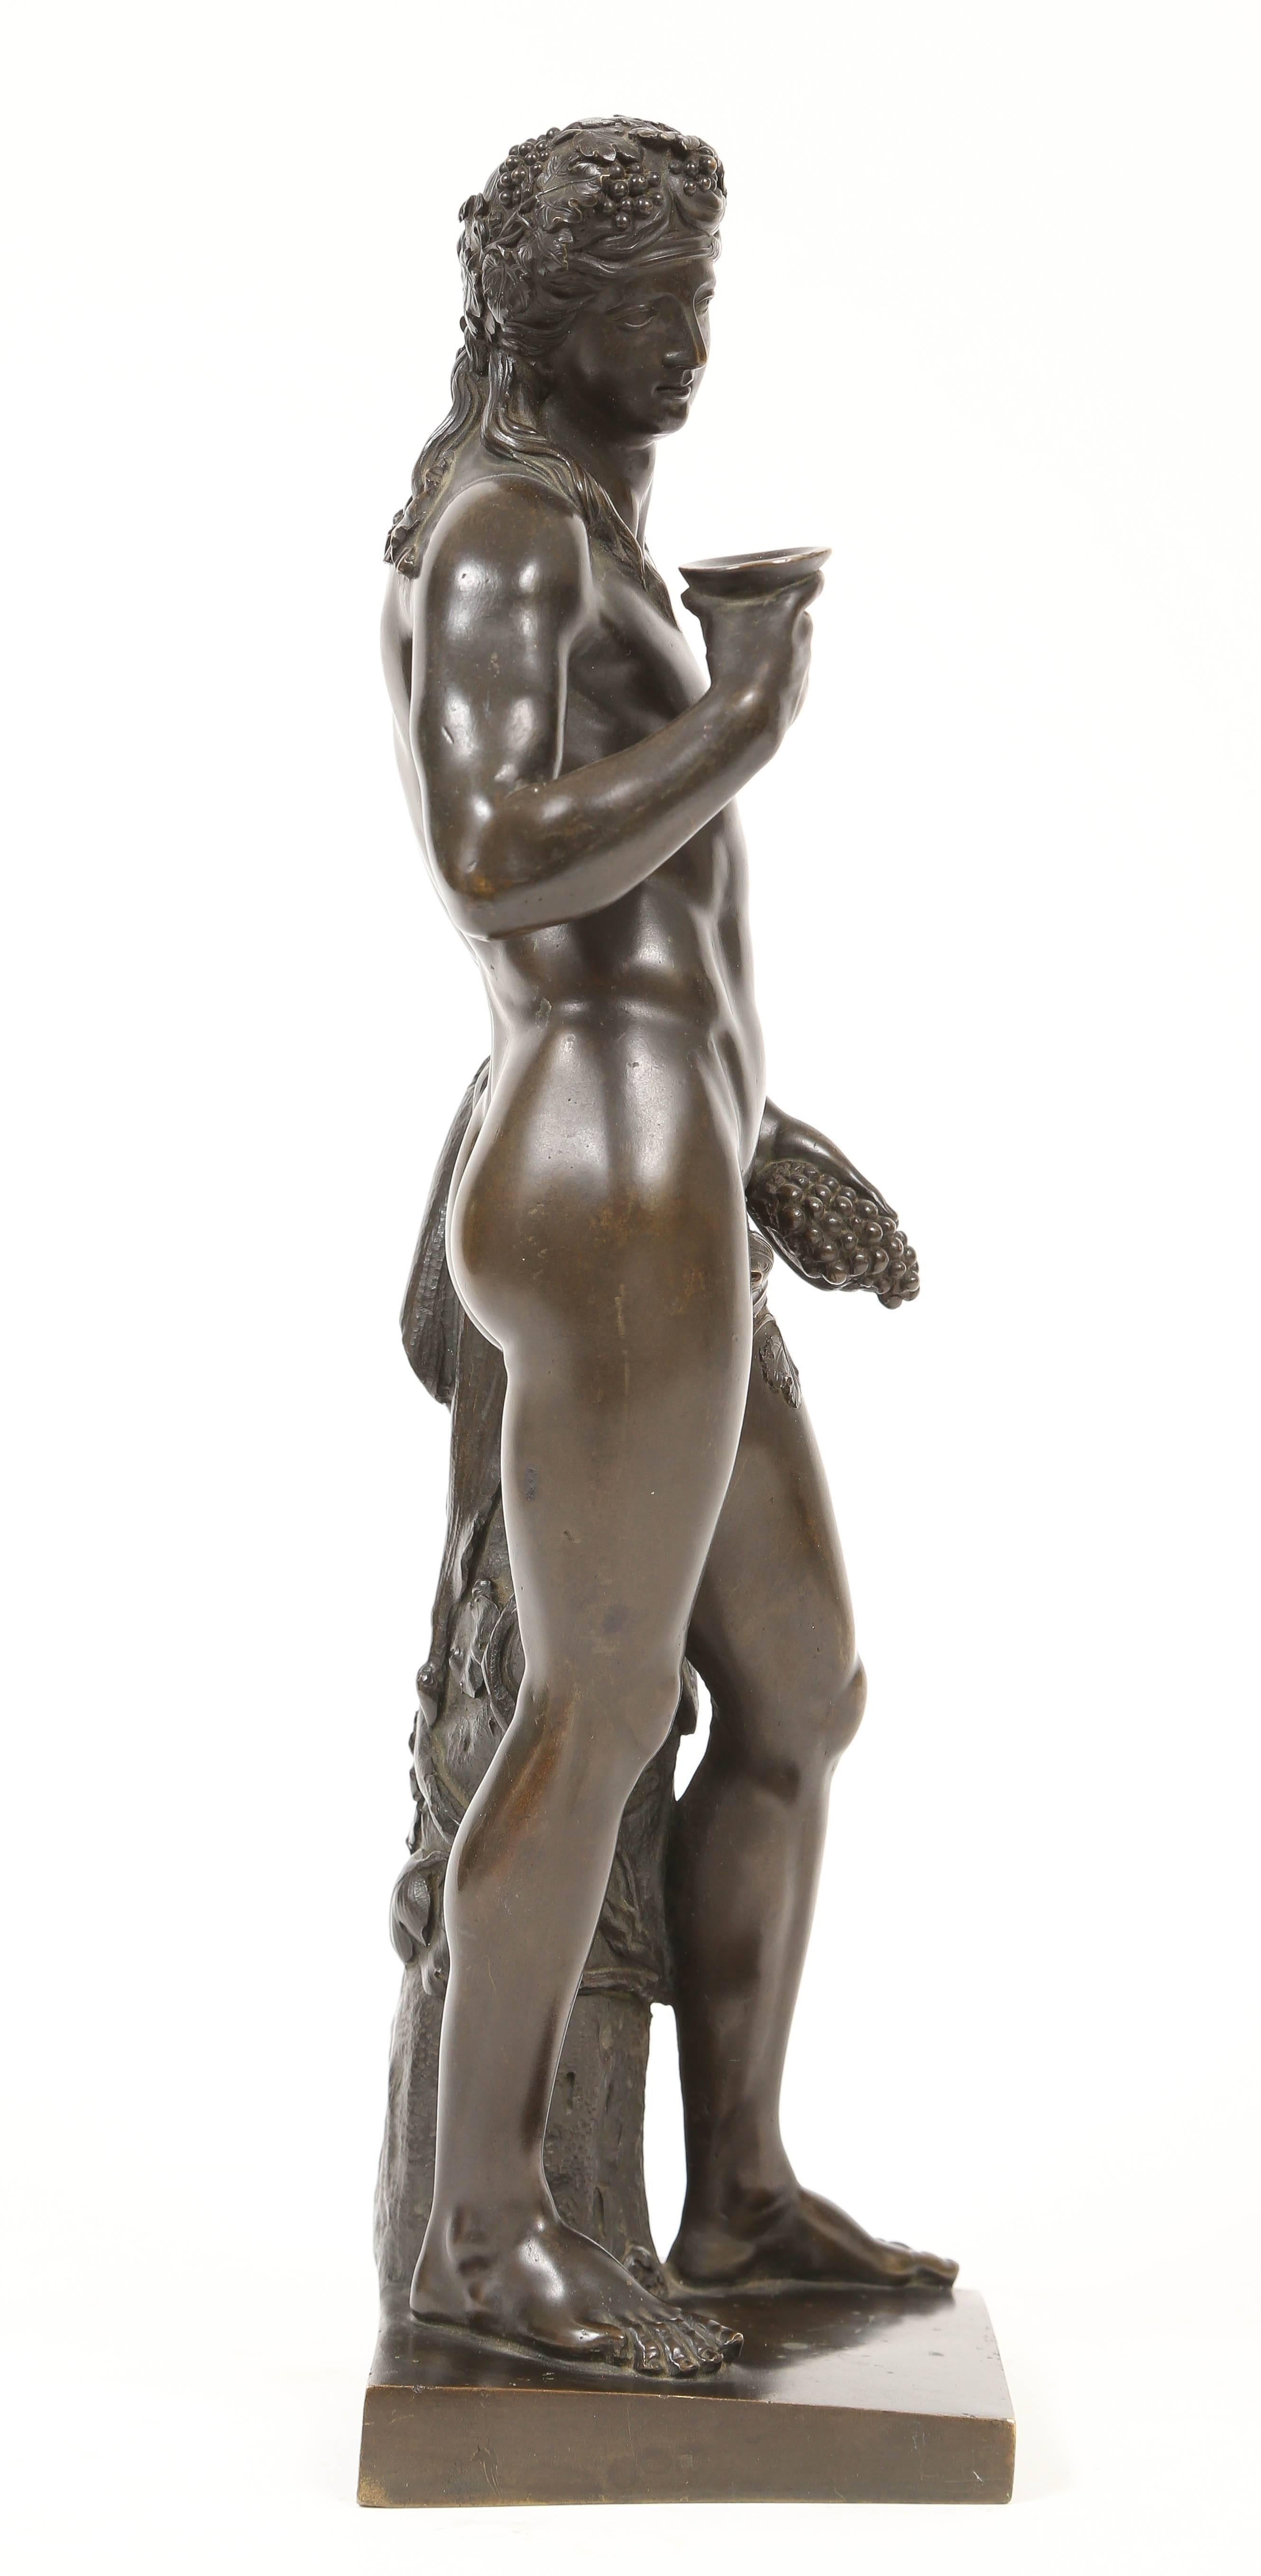 Patinated 18th c. Bronze Statuette of Bacchus, After Michel Anguier and Louis Garnier